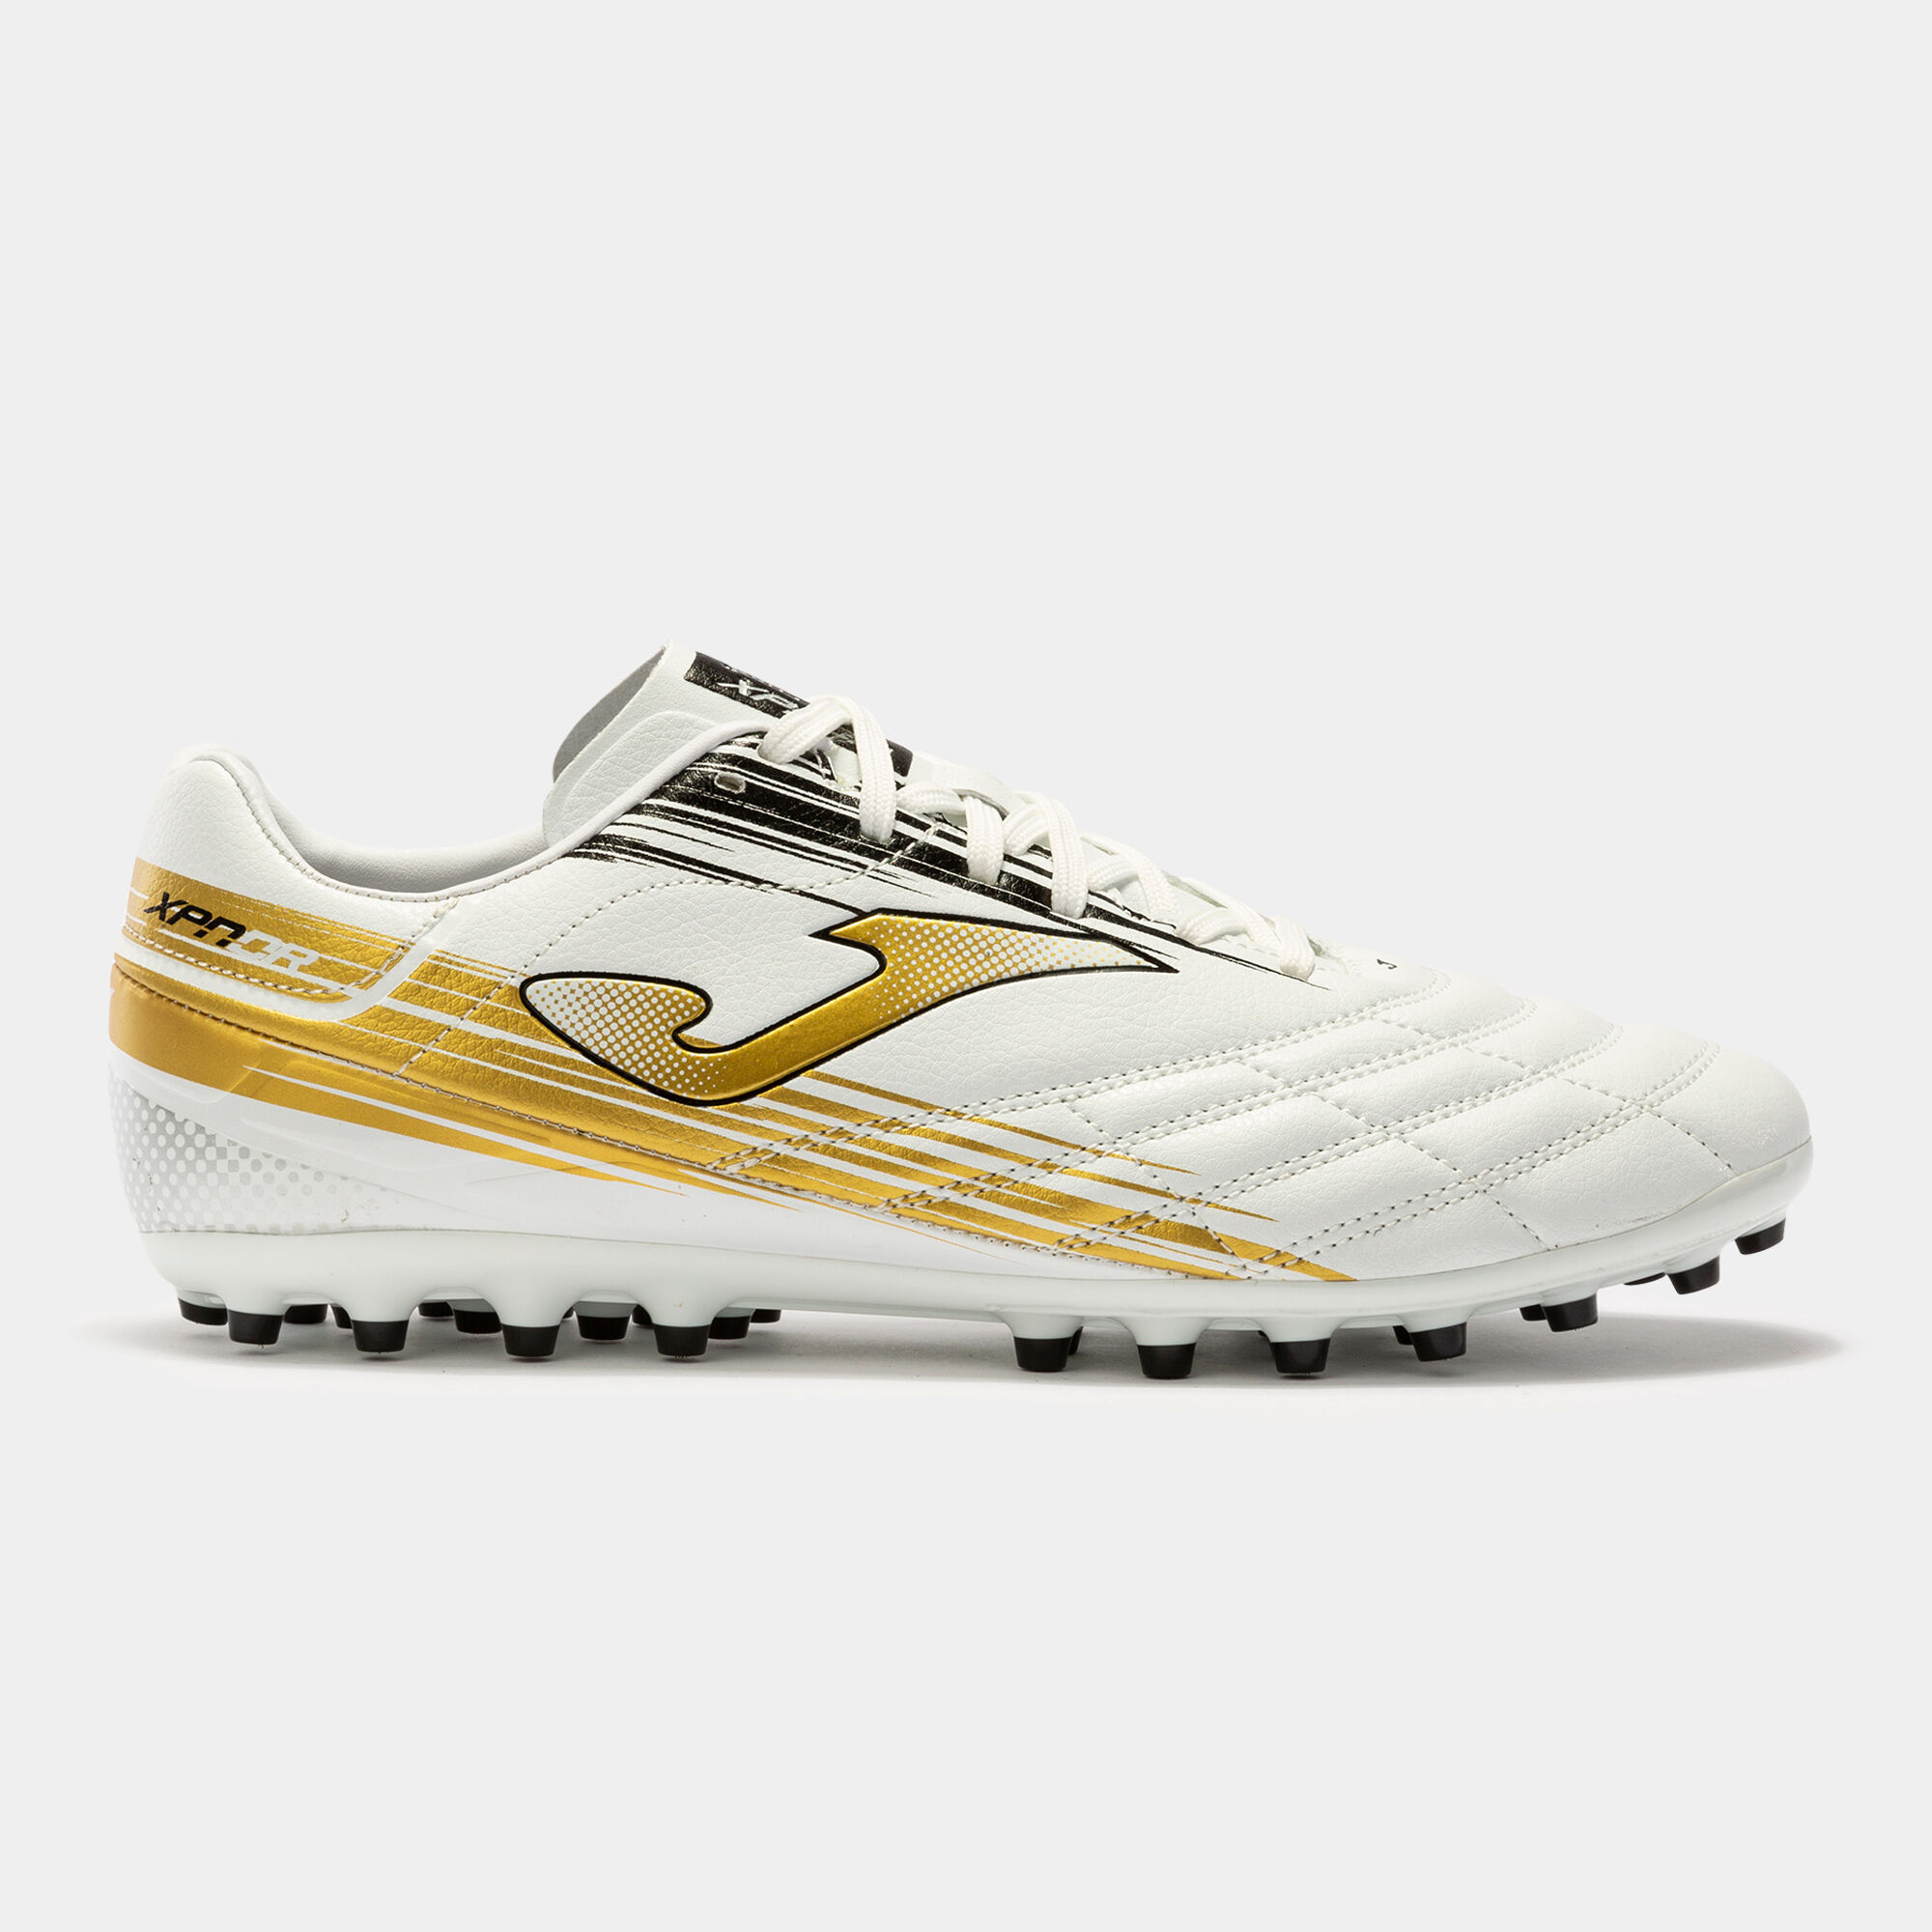 FOOTBALL BOOTS XPANDER 22 FIRM GROUND FG WHITE GOLD